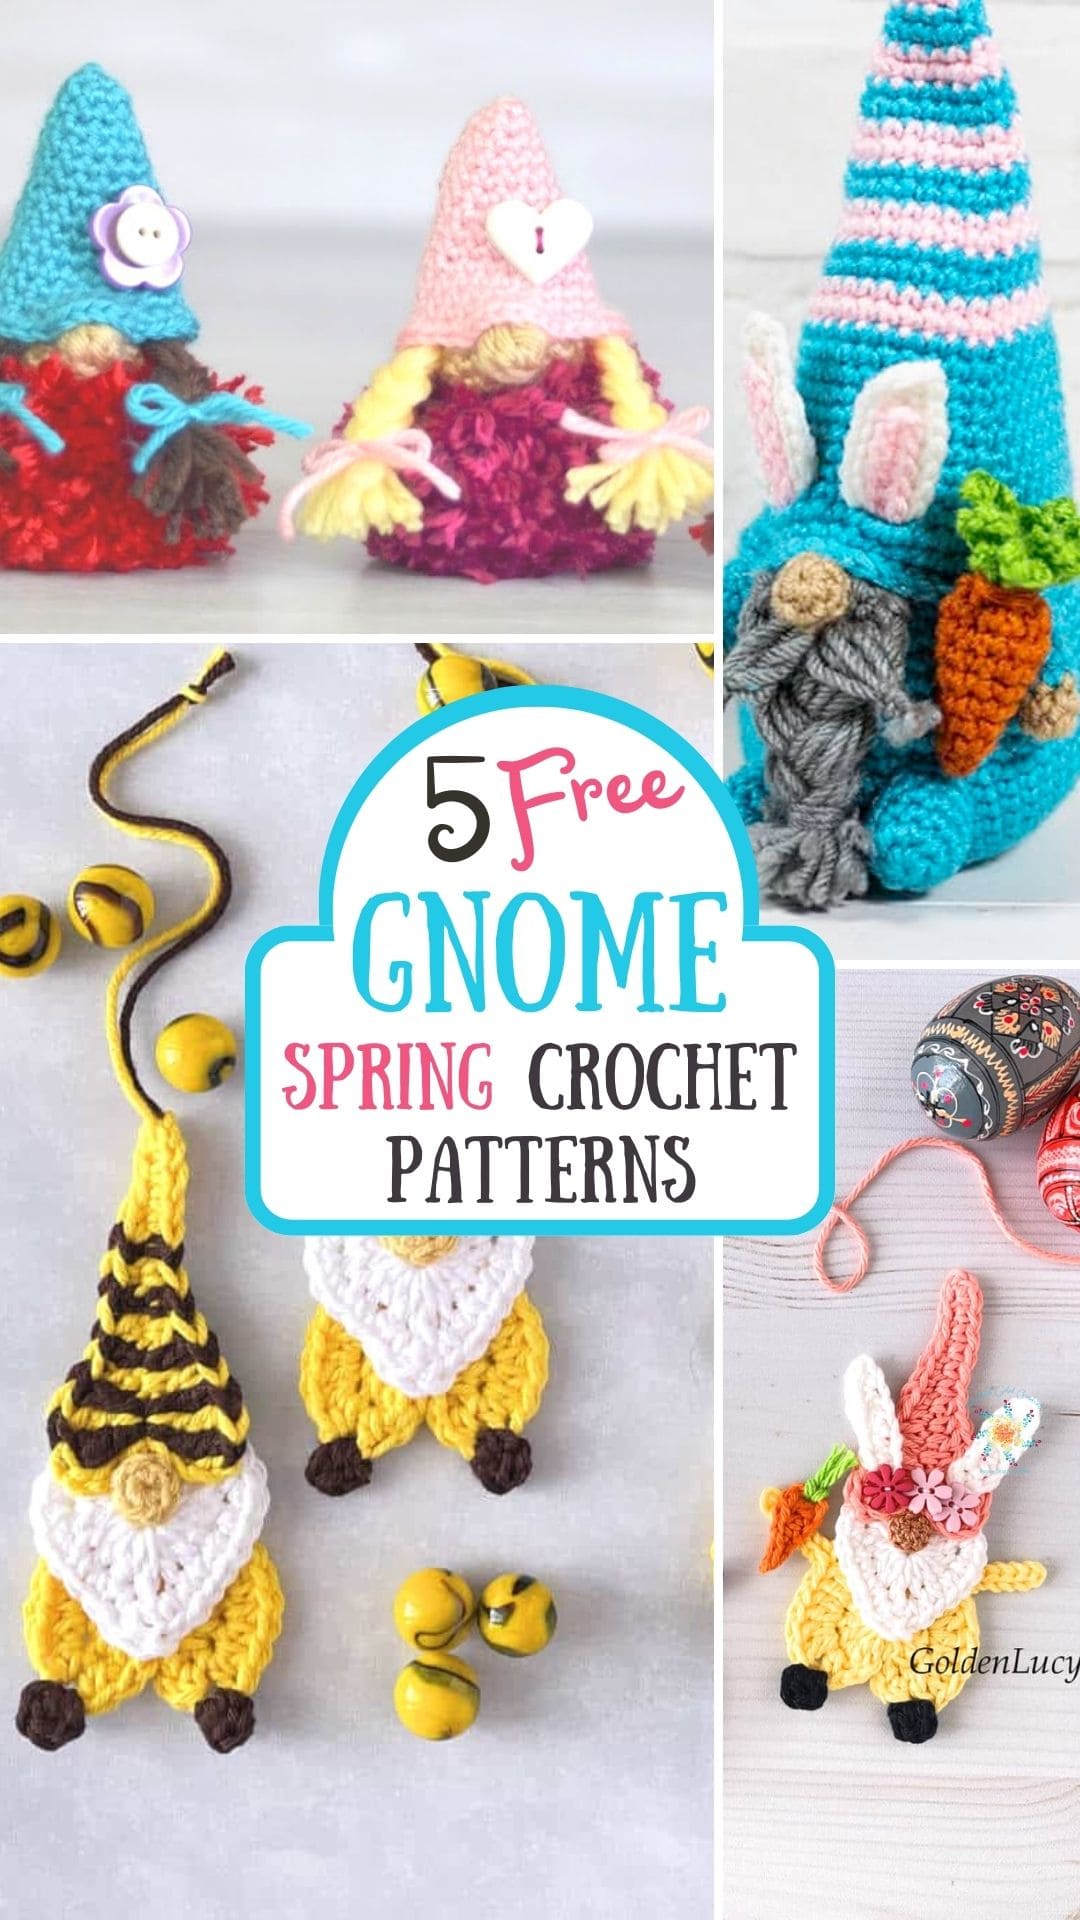 These 5 adorable spring crochet gnome patterns are a perfect way to spruce up the Easter basket this year!  Or make them for the kiddos!